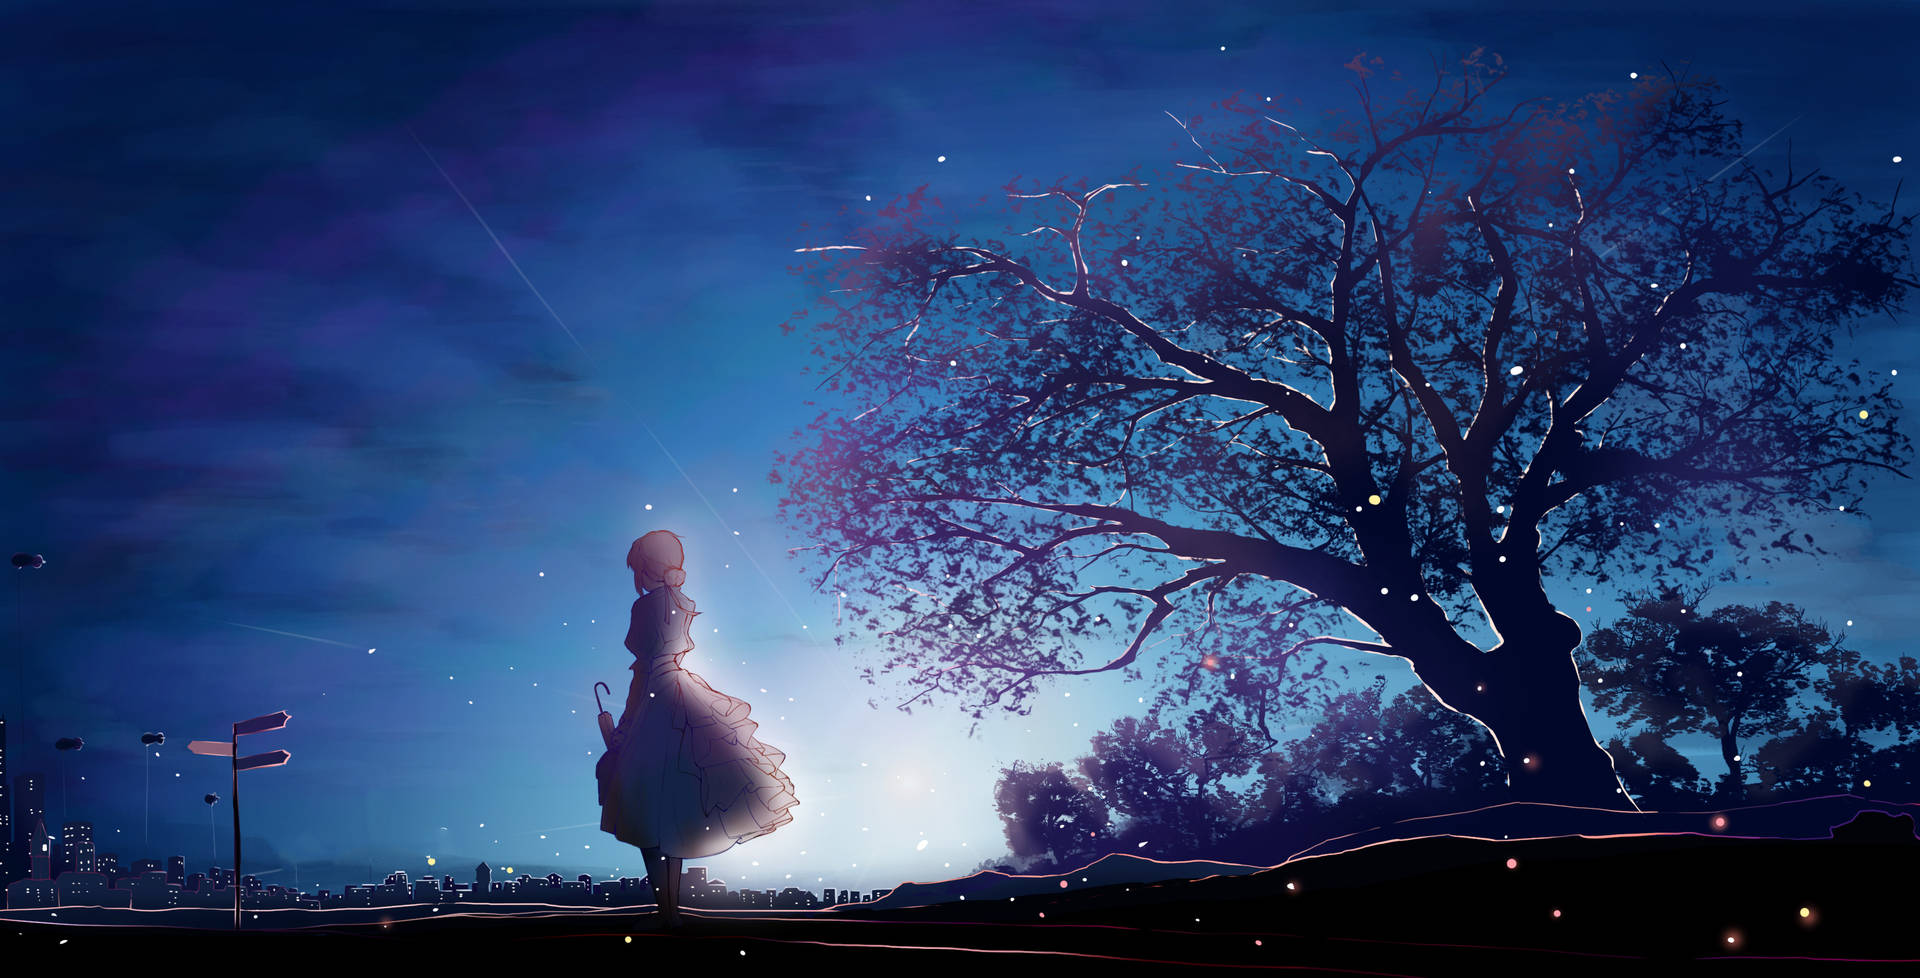 Violet Evergarden With Tree Silhouette Background